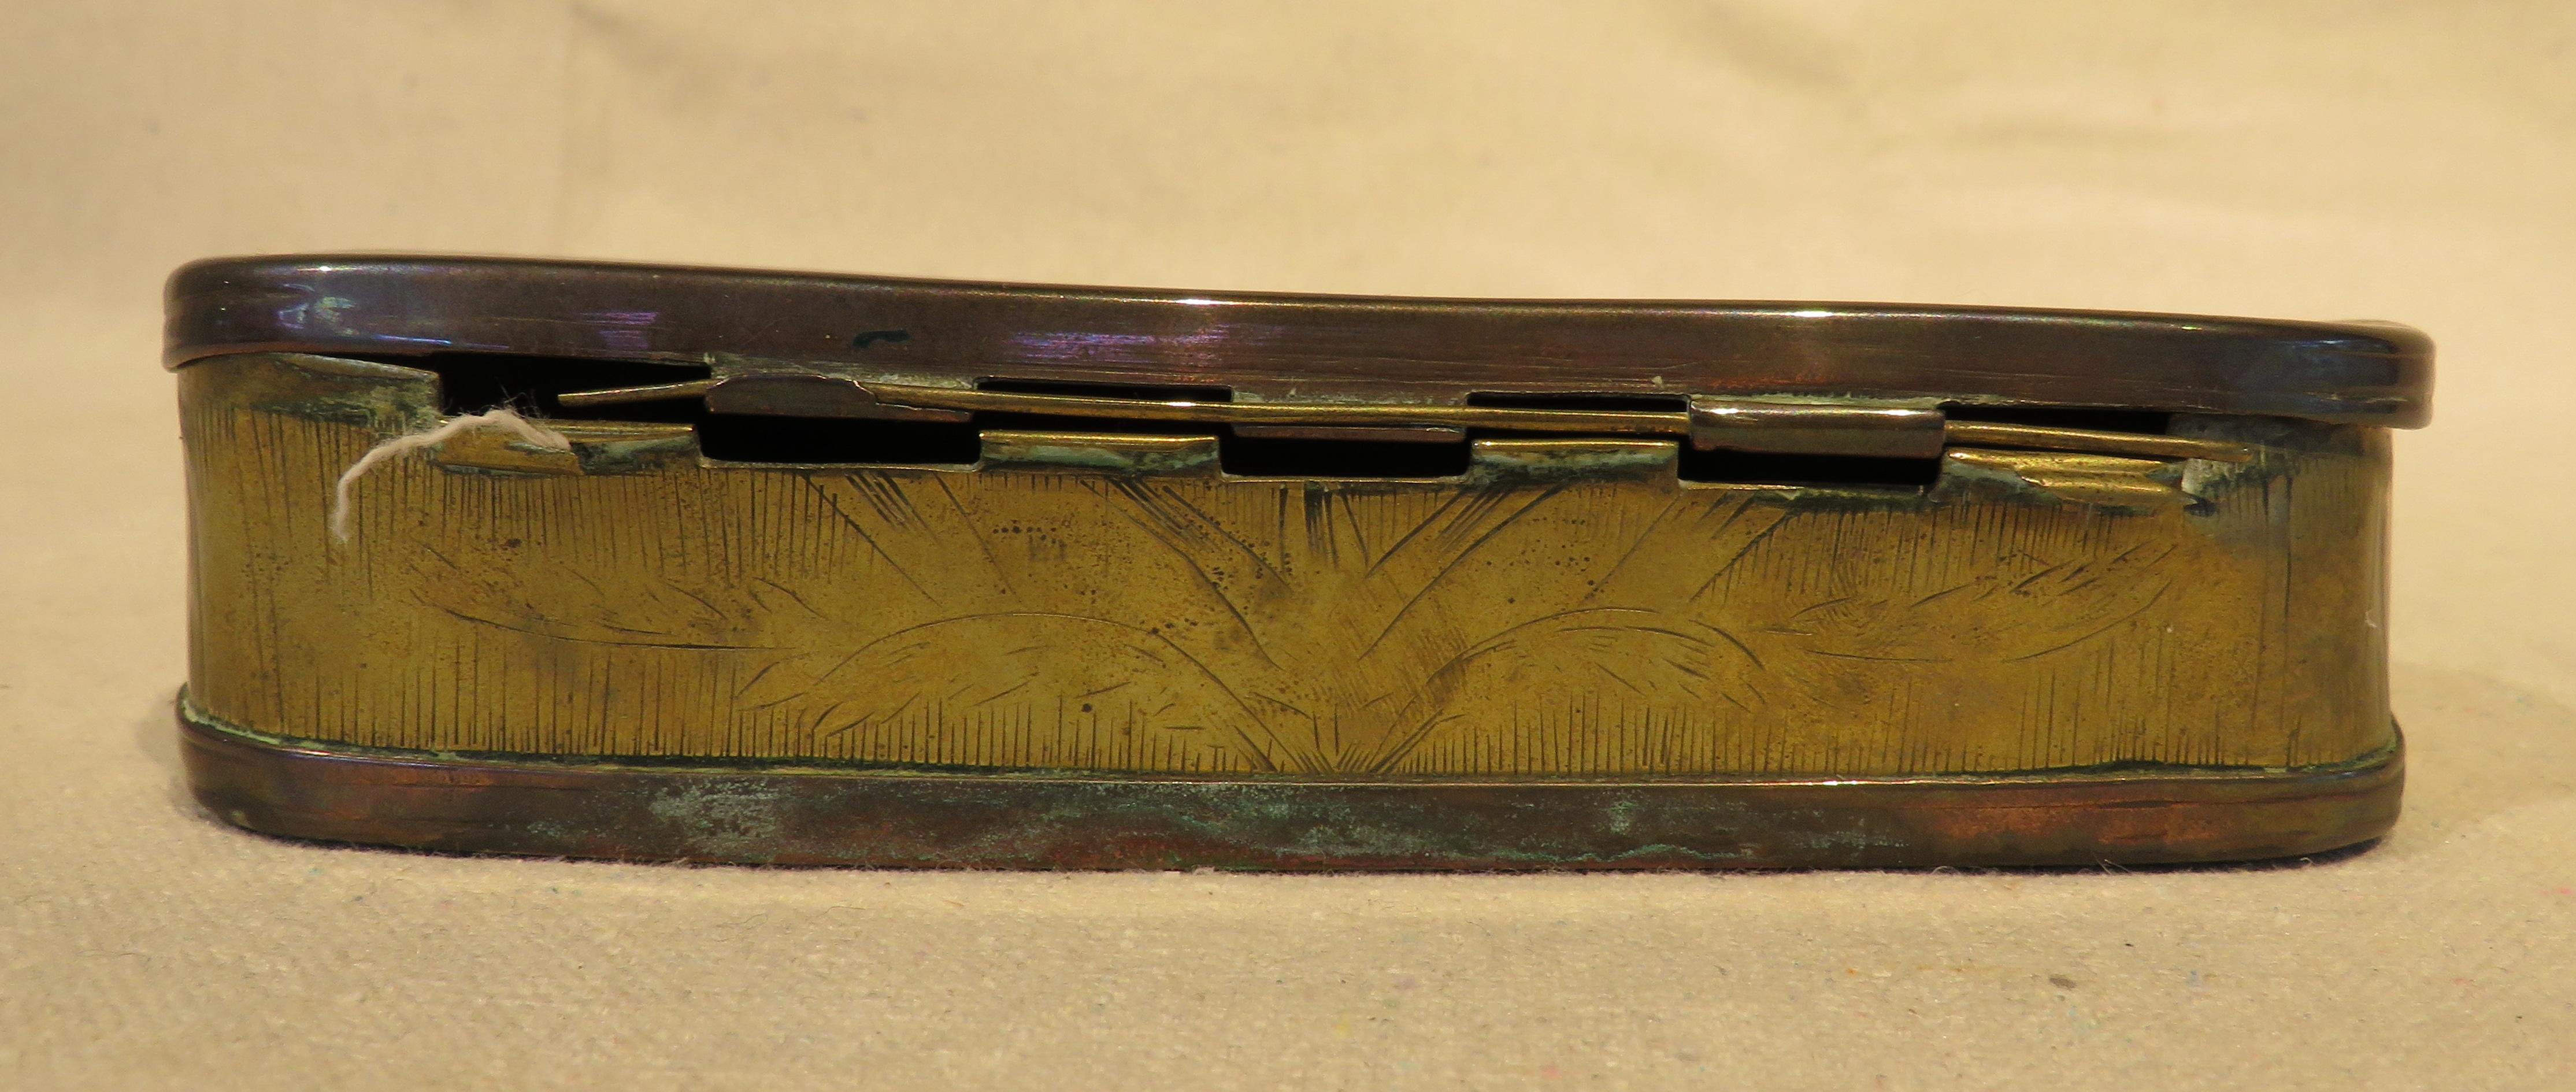 Engraved Brass and Copper Snuff Box, English, Circa 1850 For Sale 1